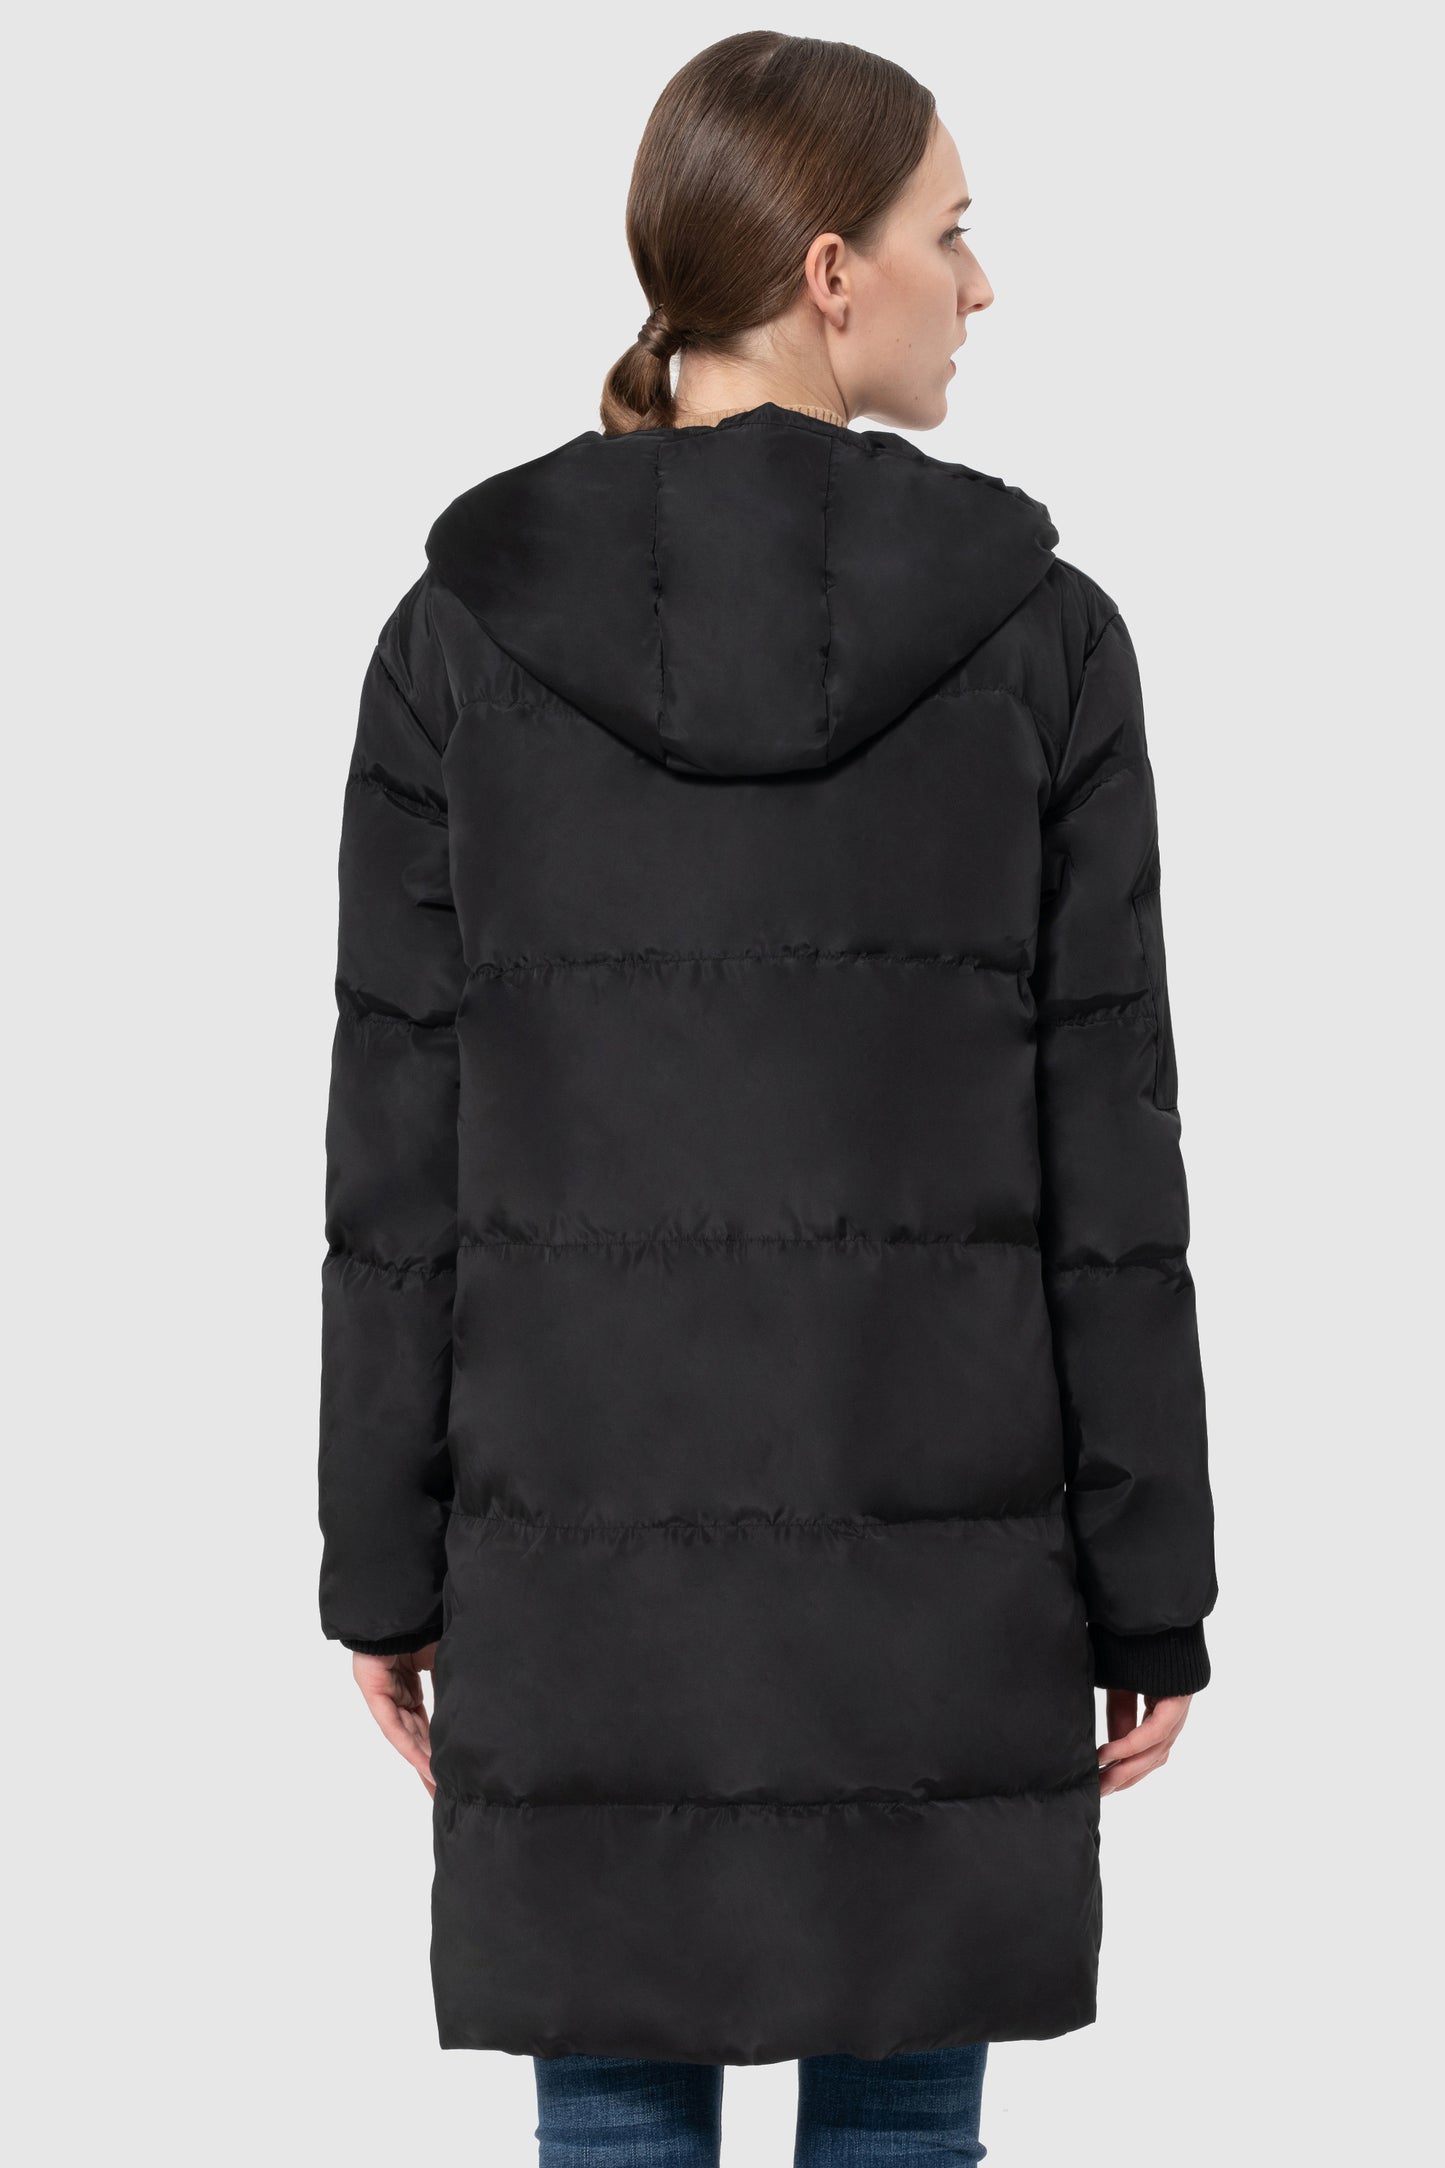 Plus Size Thicken Down Jacket Hooded Coat